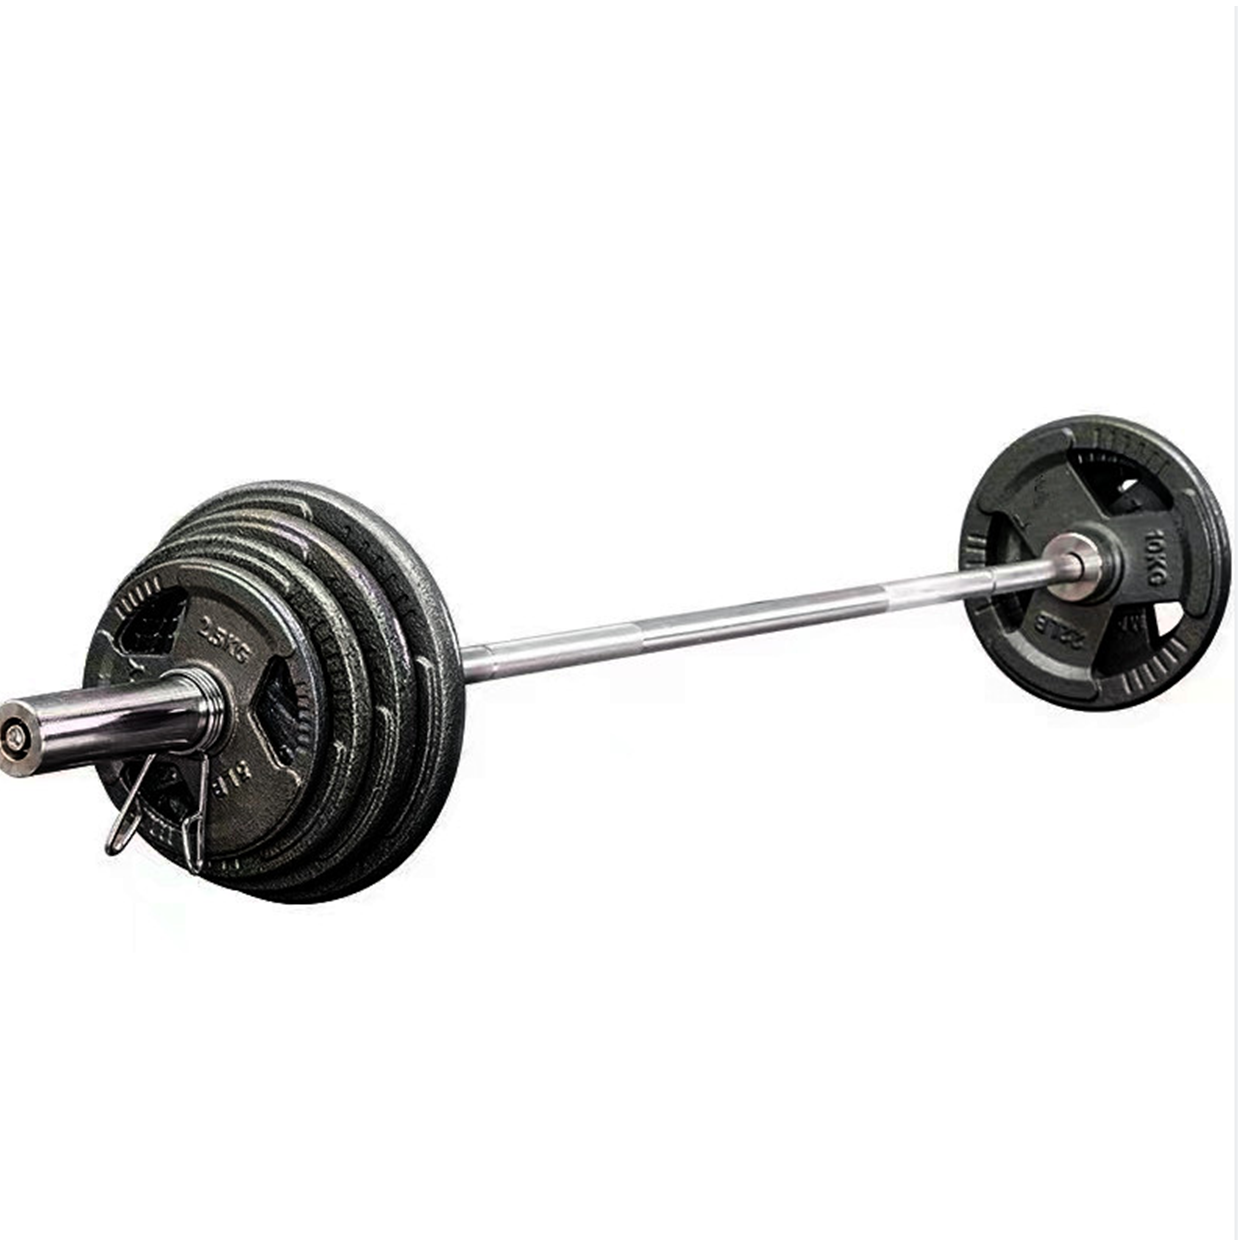 100KG Metal Weights Set with 15KG Olympic Barbell